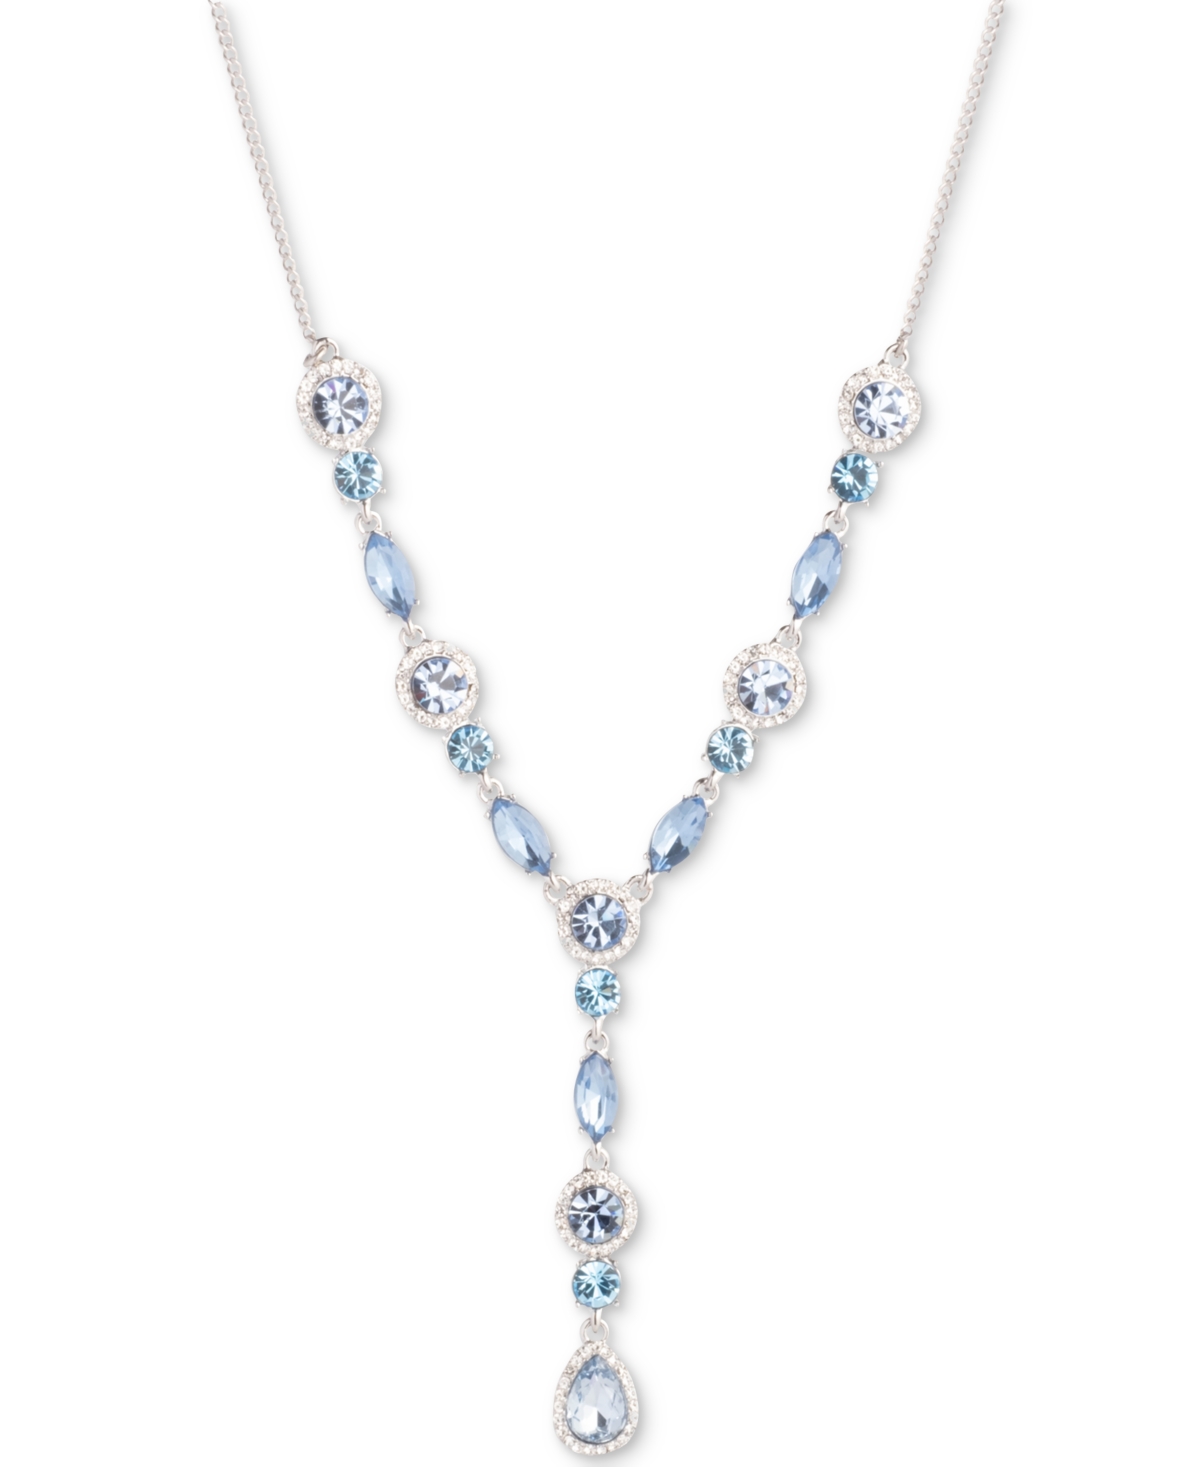 Pave & Color Crystal Lariat Necklace, 16" + 3" extender - Navy